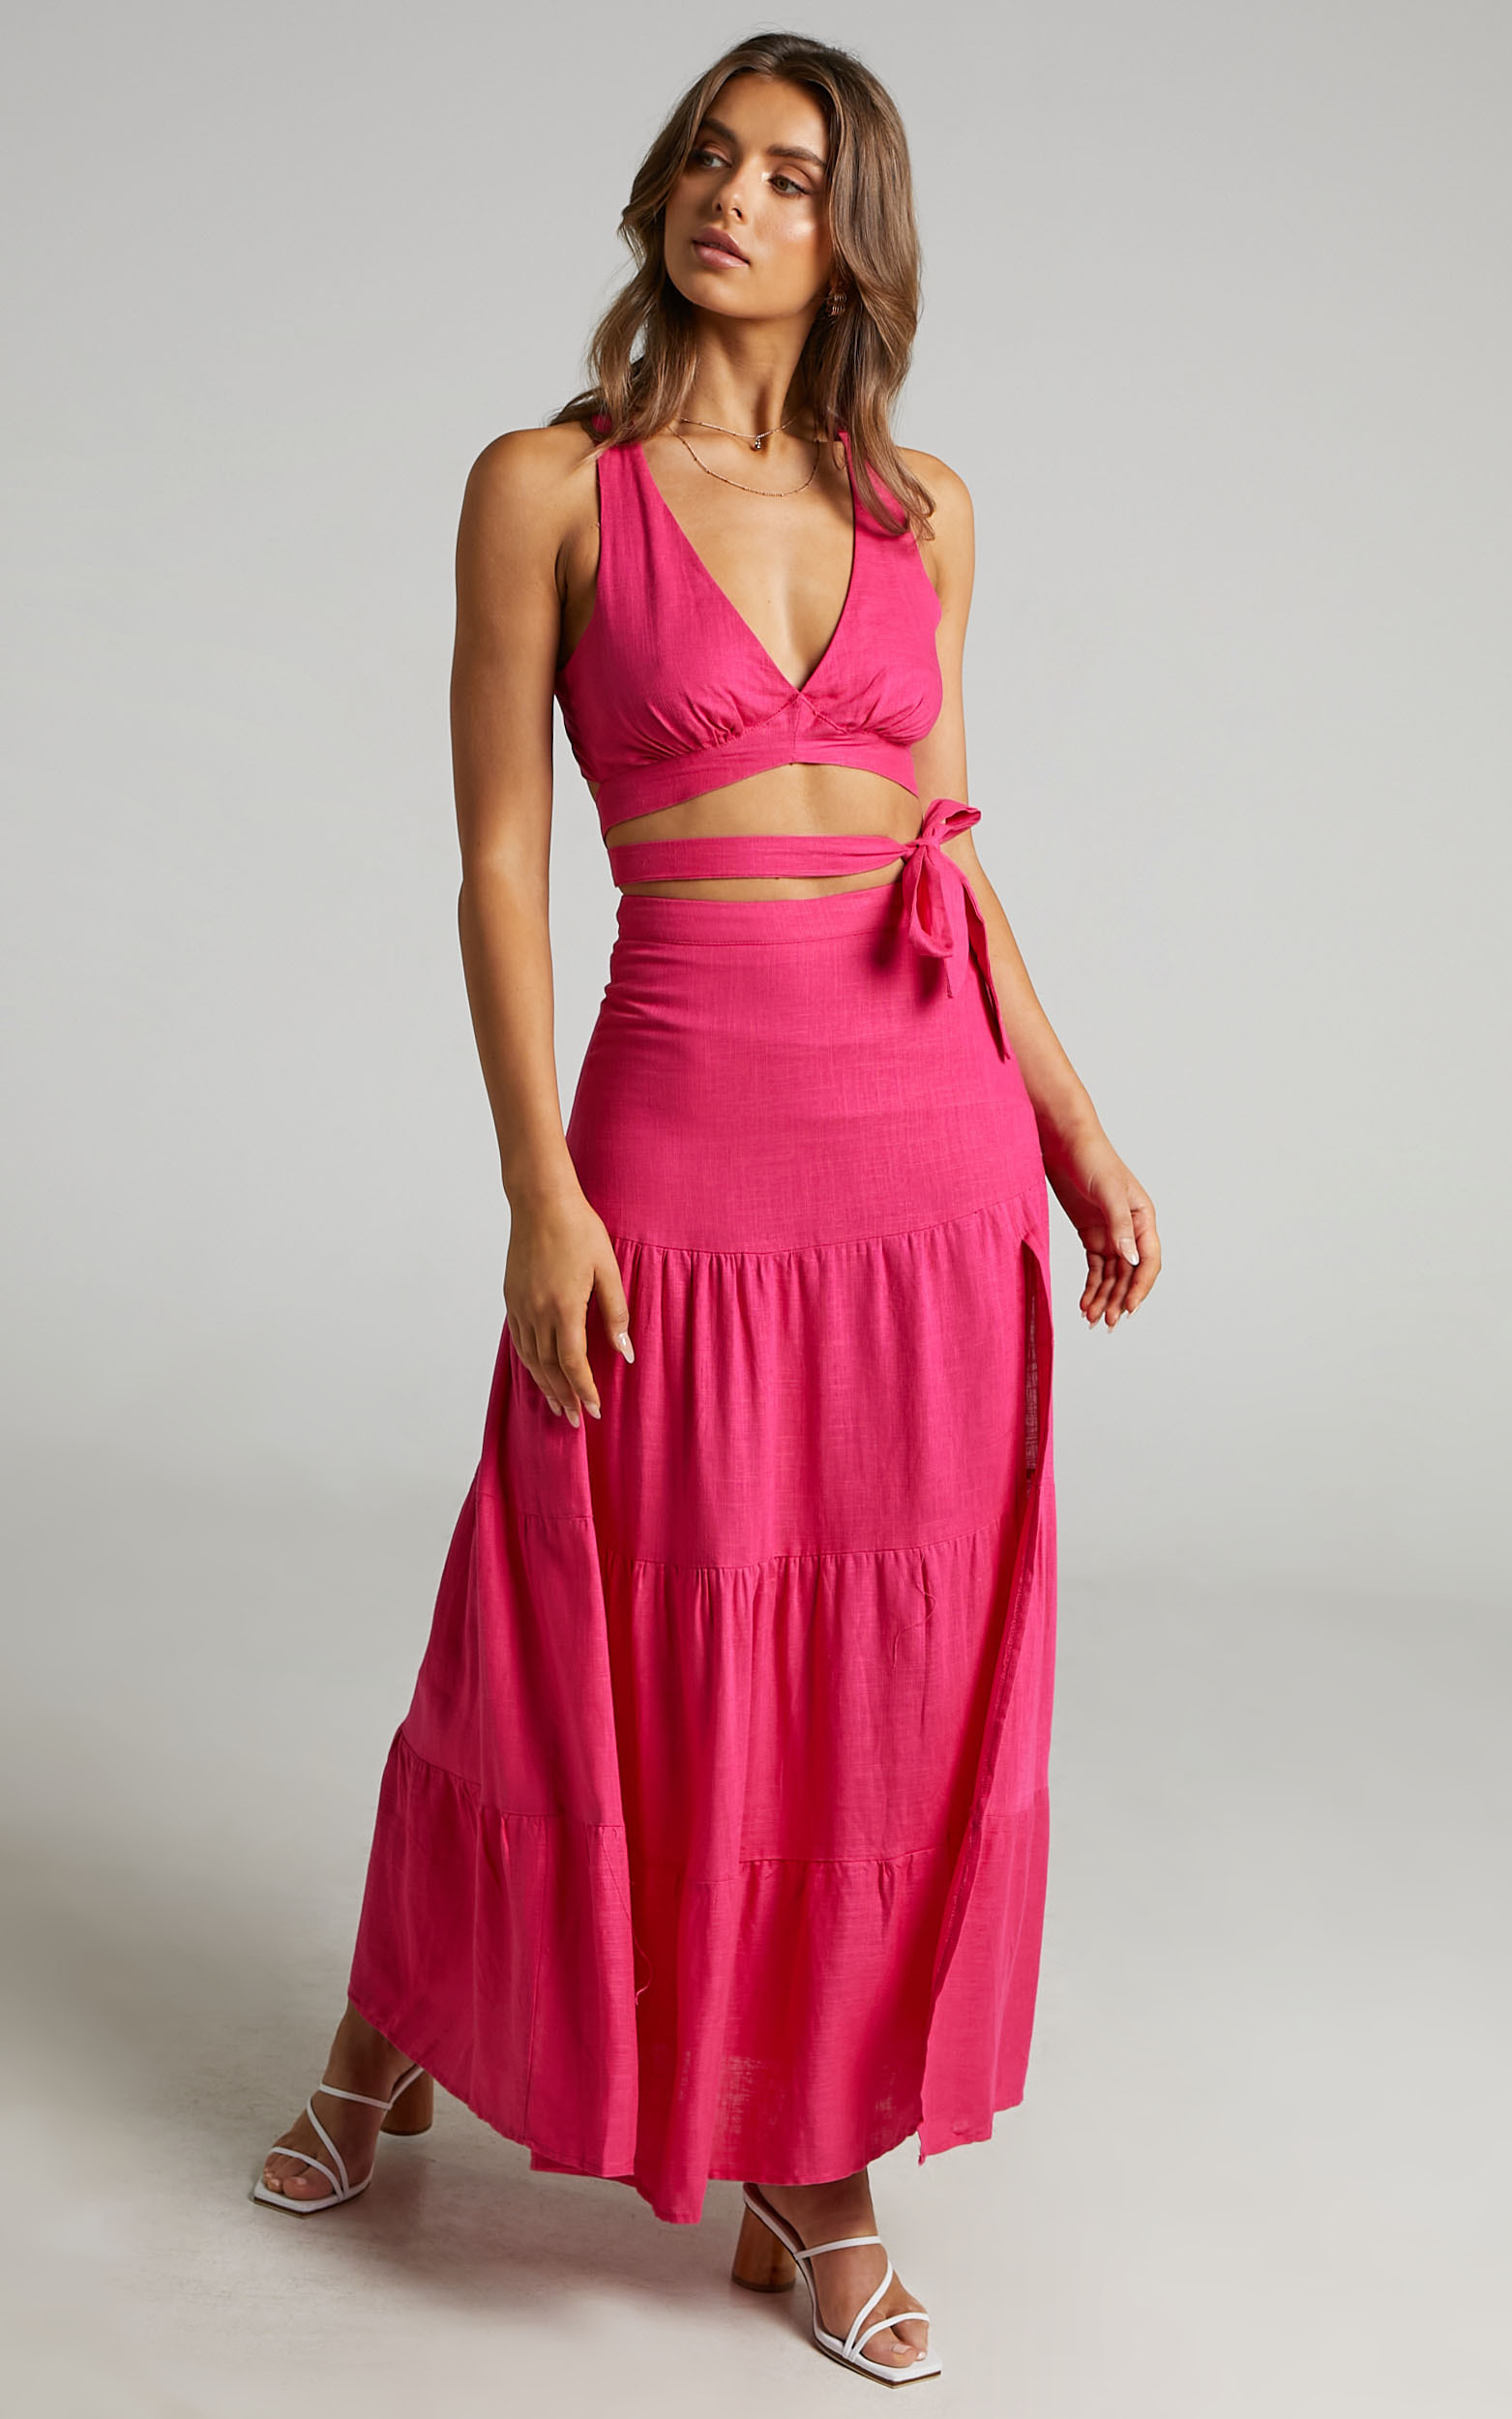 Delima two piece top and skirt set in Hot Pink - 04, PNK1, hi-res image number null